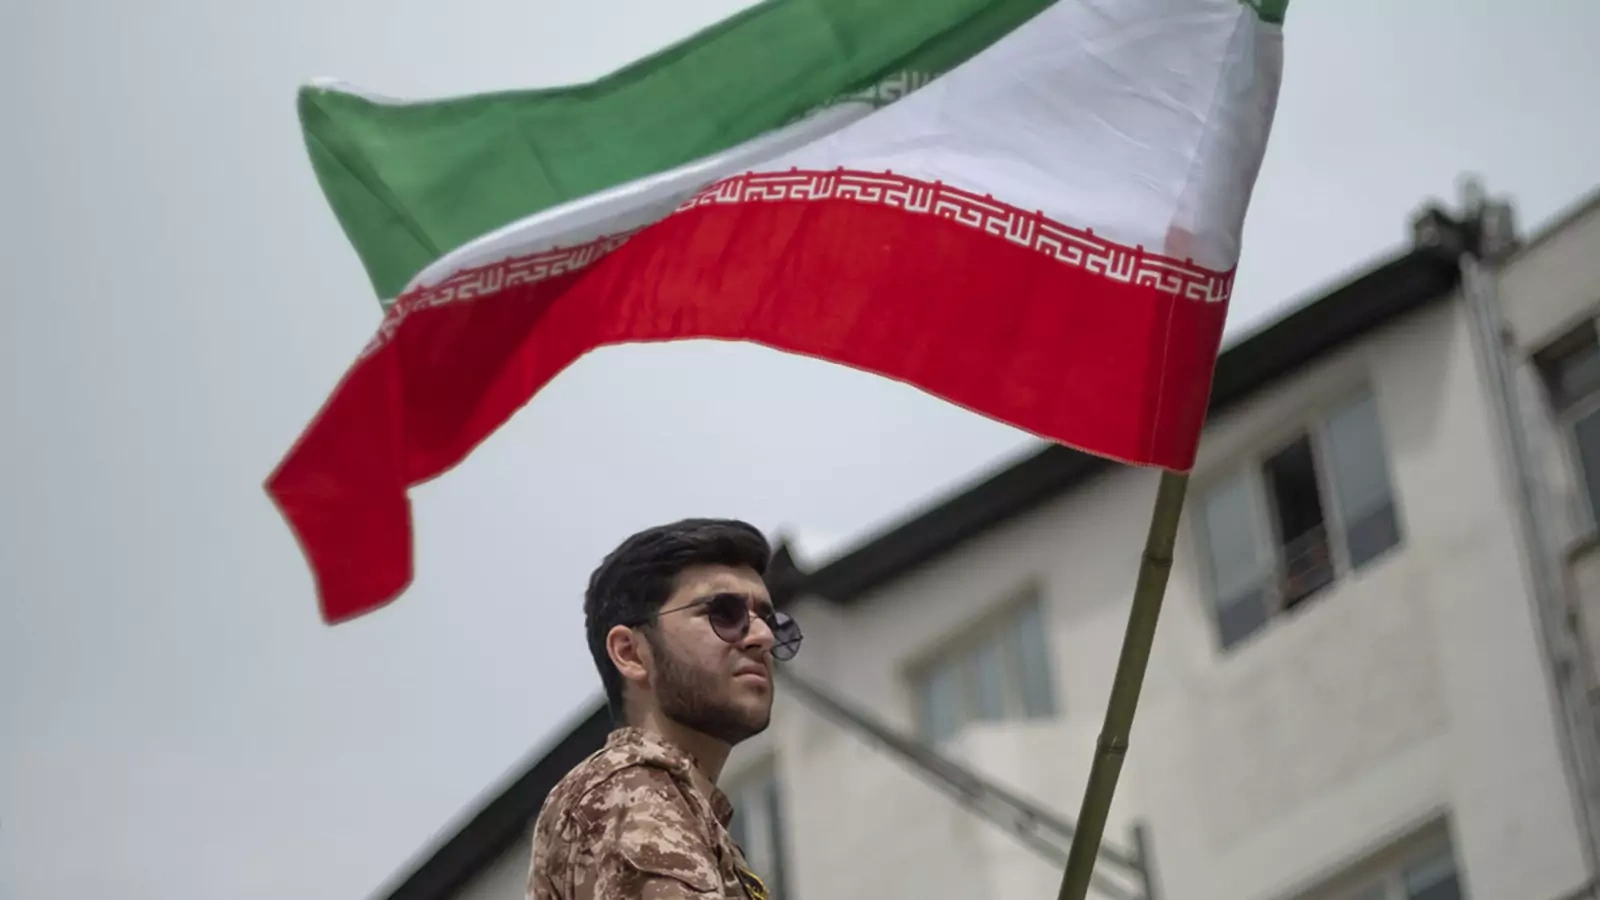 A member of the Islamic Revolutionary Guard Corps waves the Iranian flag during a rally in downtown Tehran.